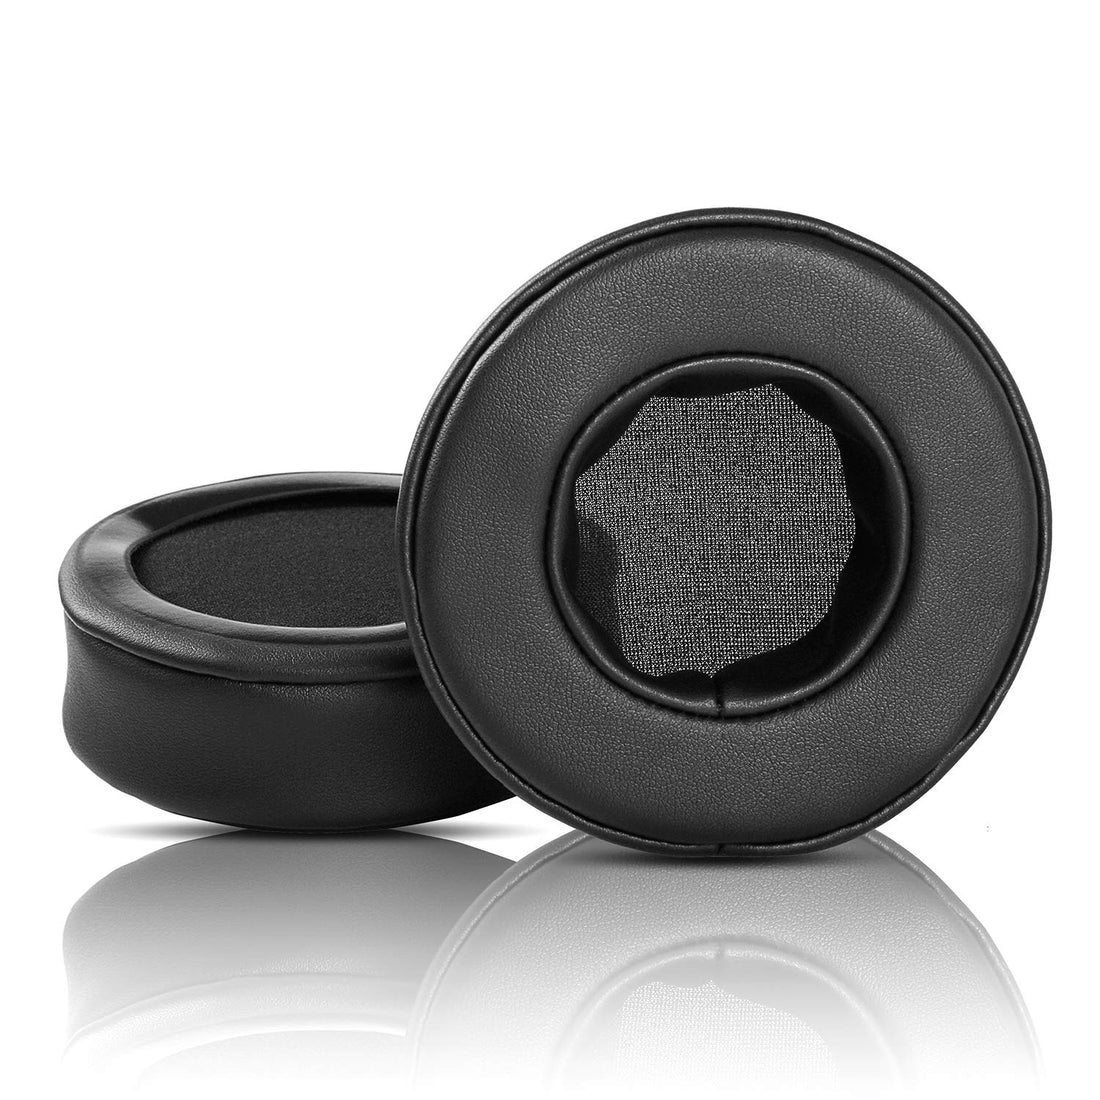 Replaceable Earpad Cups Cushions Compatible with Plantronics Voyager 104 Headset Earmuffs Cups (Style1)